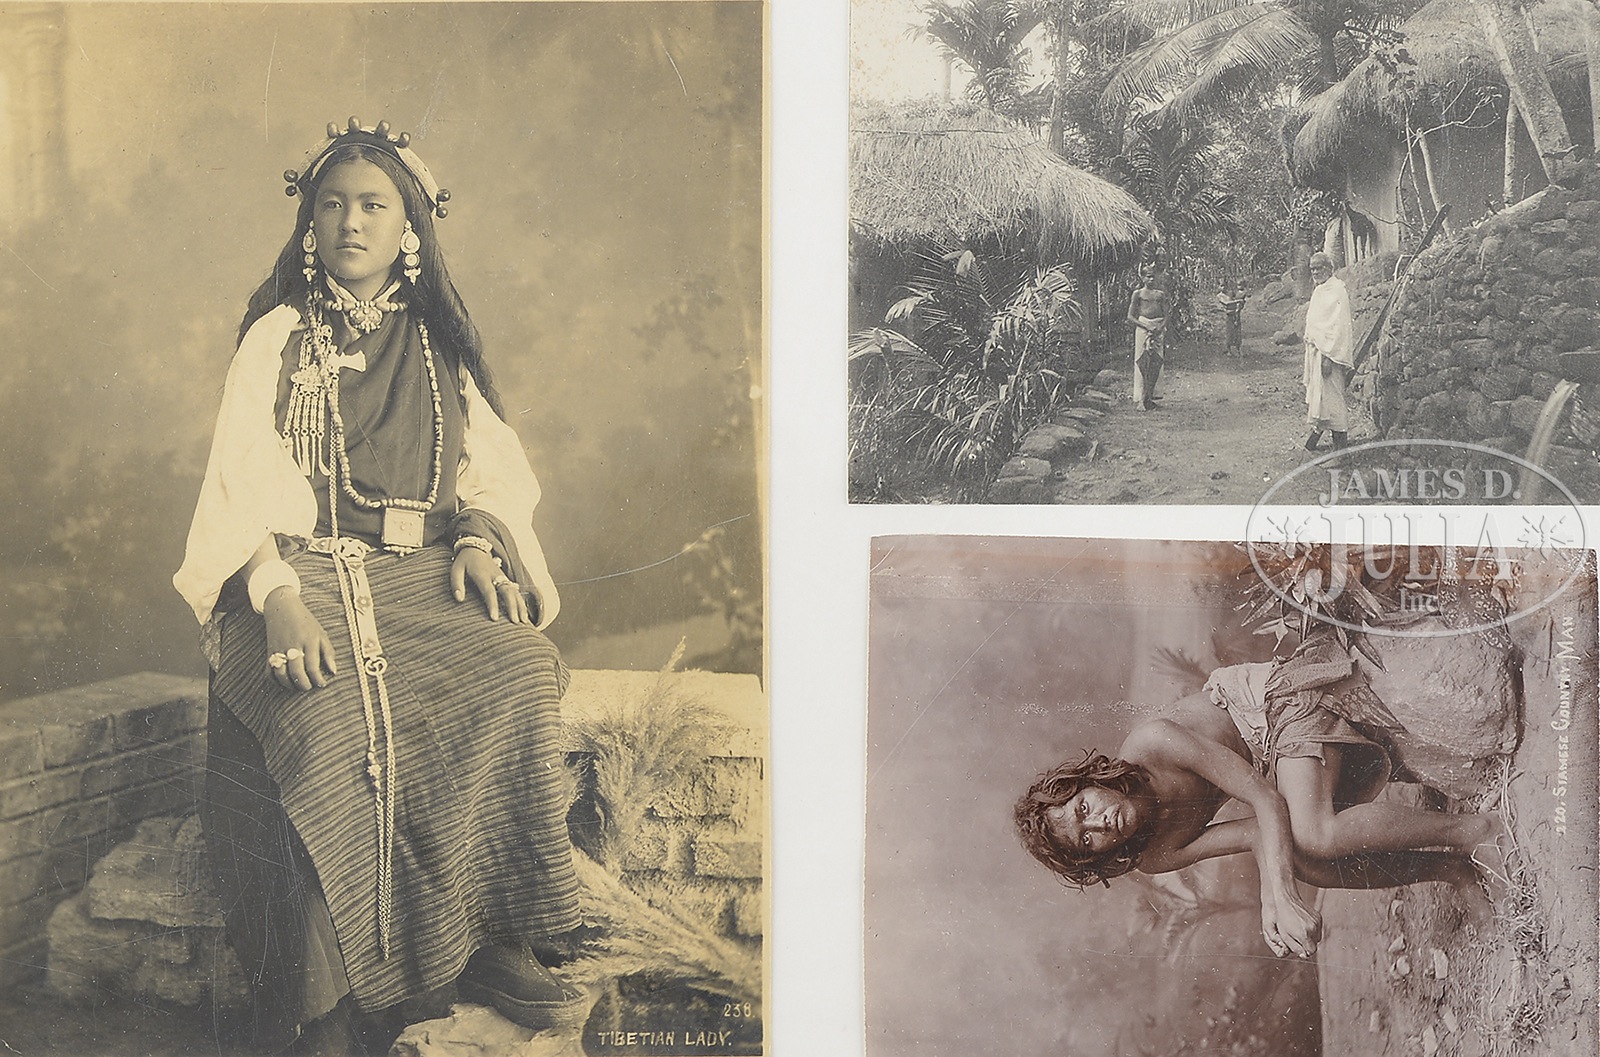 EXTRAORDINARY & MASSIVE LIFE LONG COLLECTION OF RARE ASIAN PHOTOGRAPHS AMASSED BY DR. HELGA WALL- - Image 64 of 222